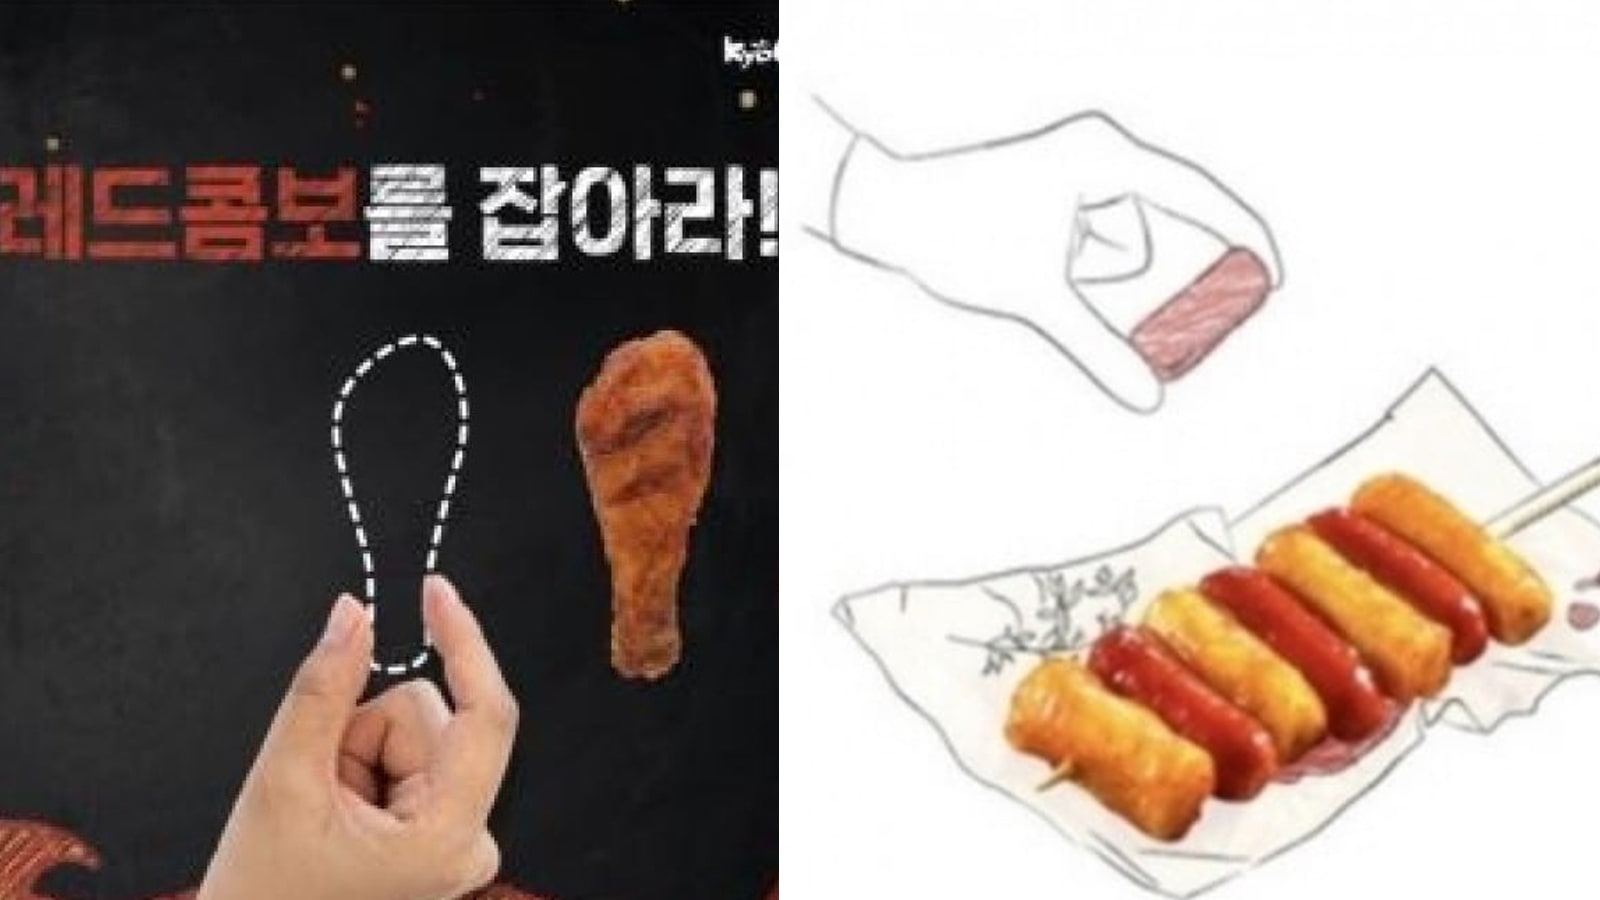 Korean Brands Remove Ads Featuring This Hand Gesture After Men’s Rights Activists Complain That It’s “Anti-Male”